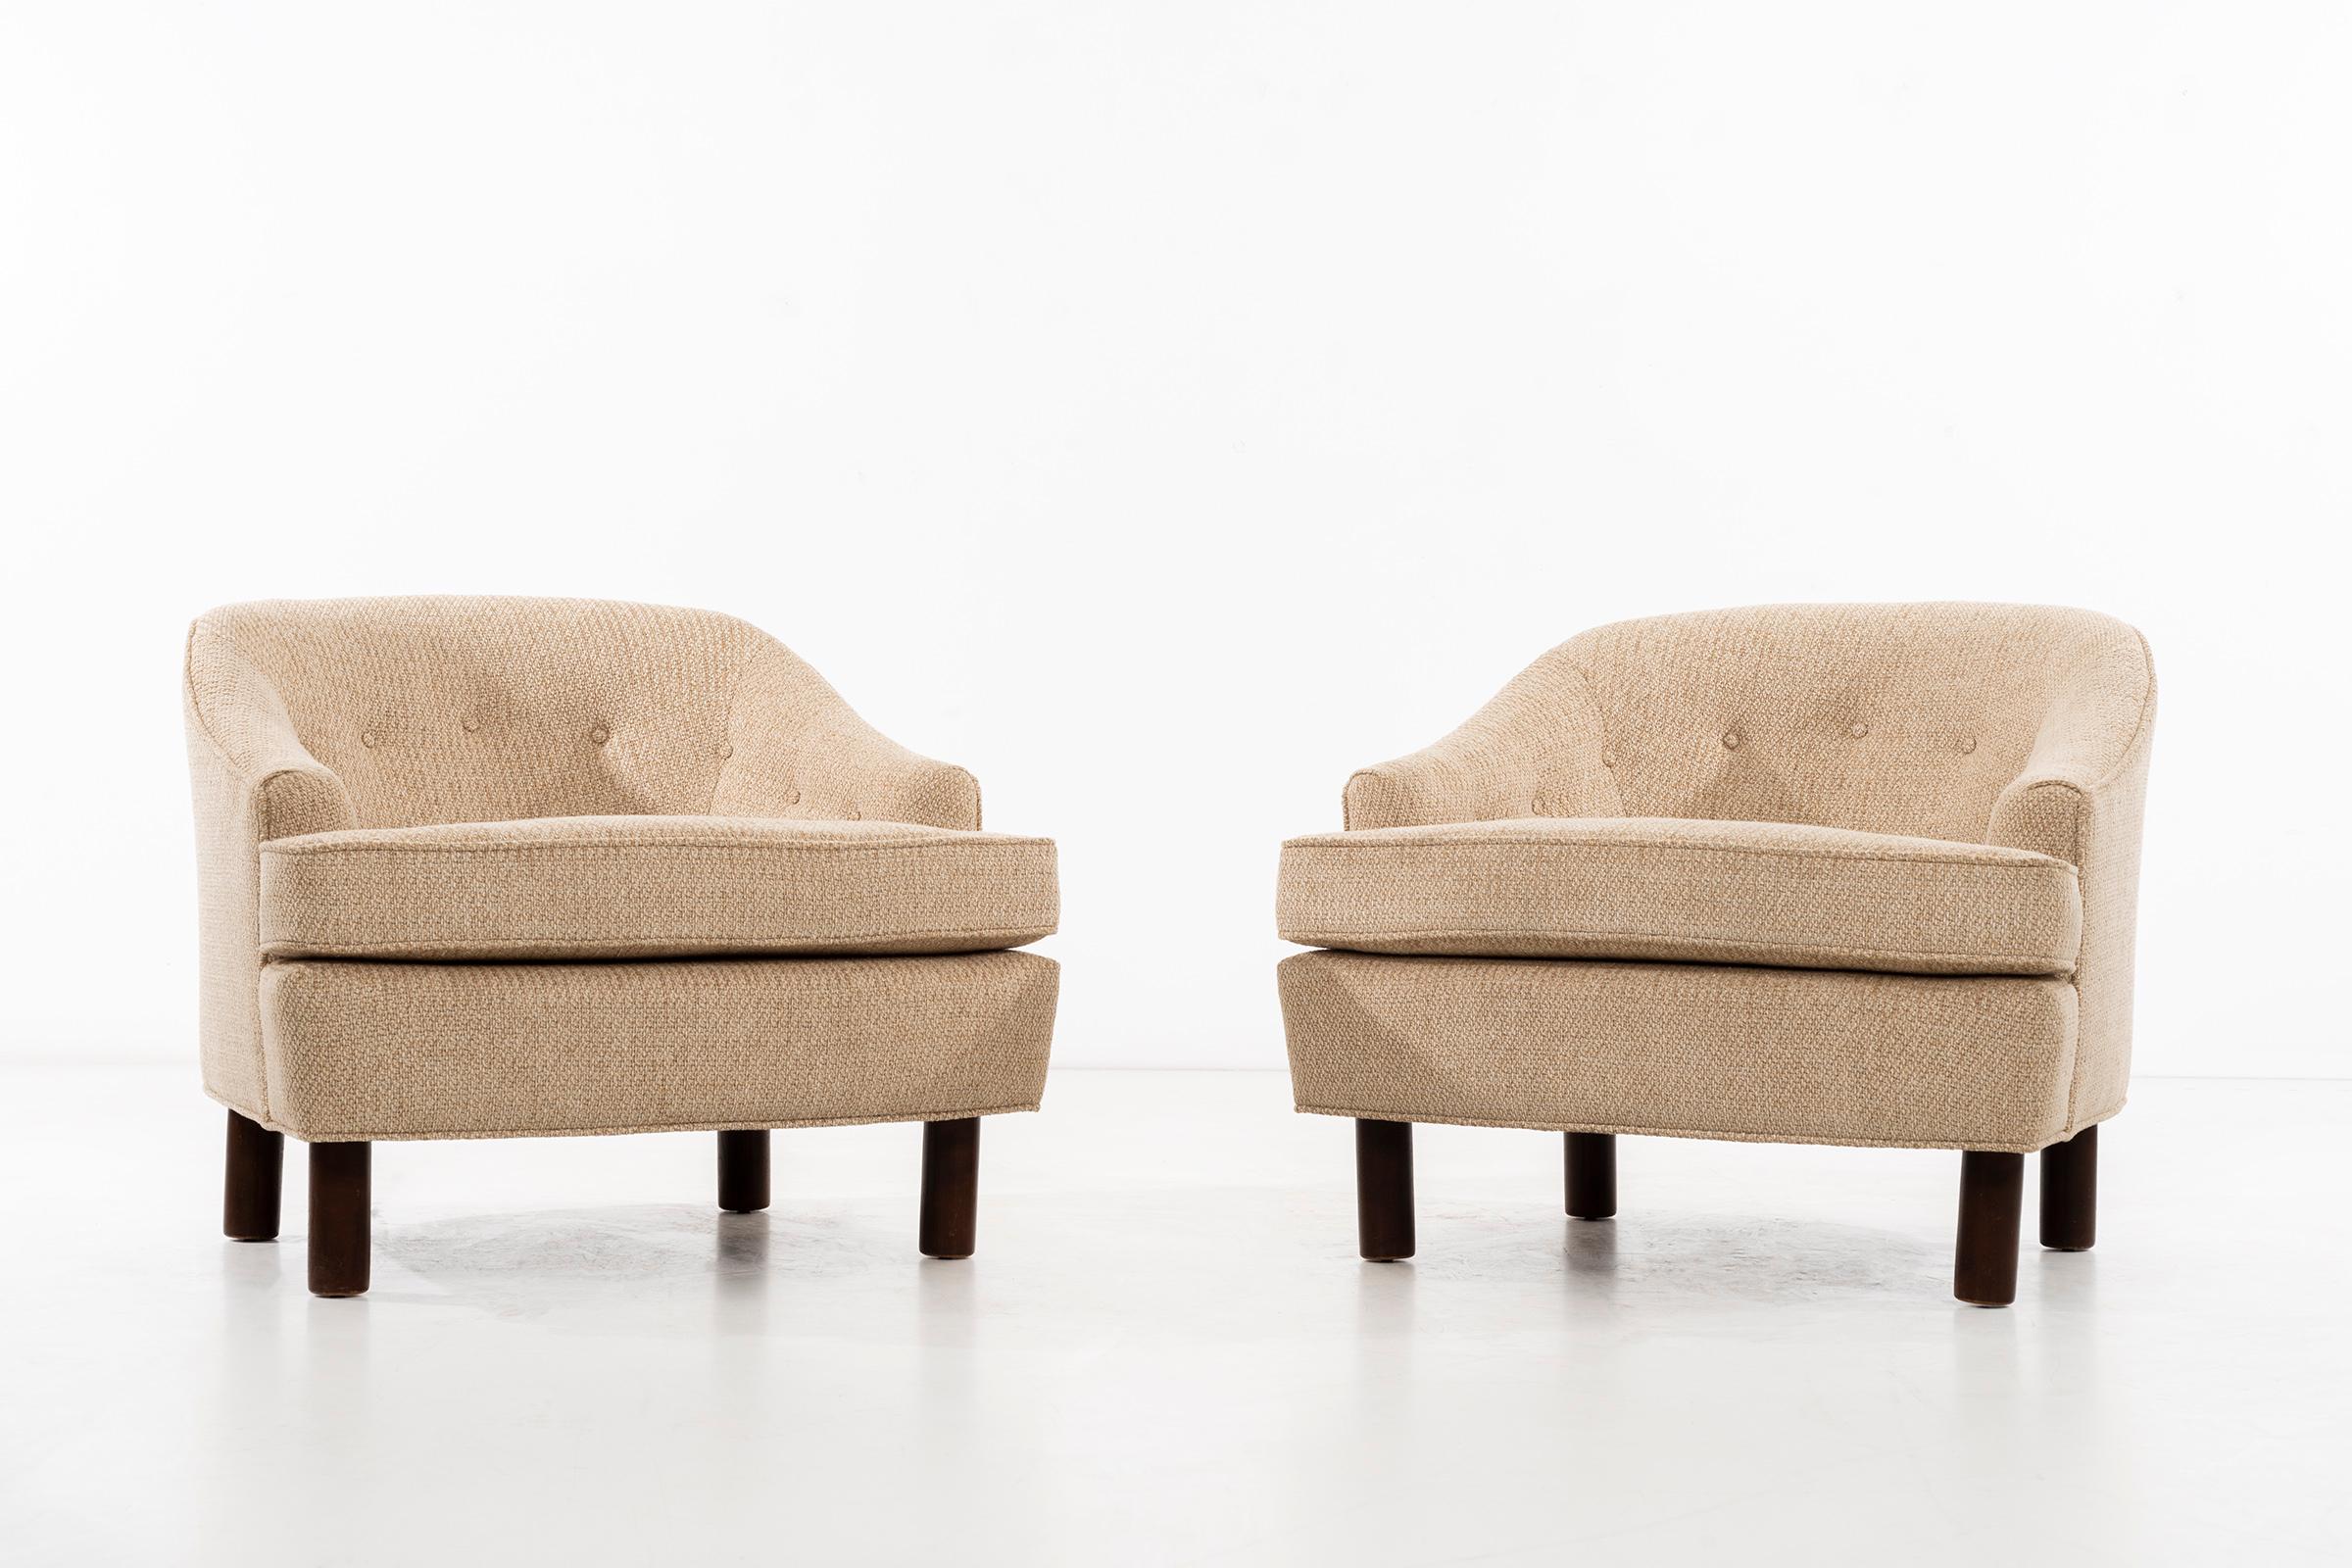 Pair of barrel back lounge chairs with pincore foam cushions. Solid walnut legs.